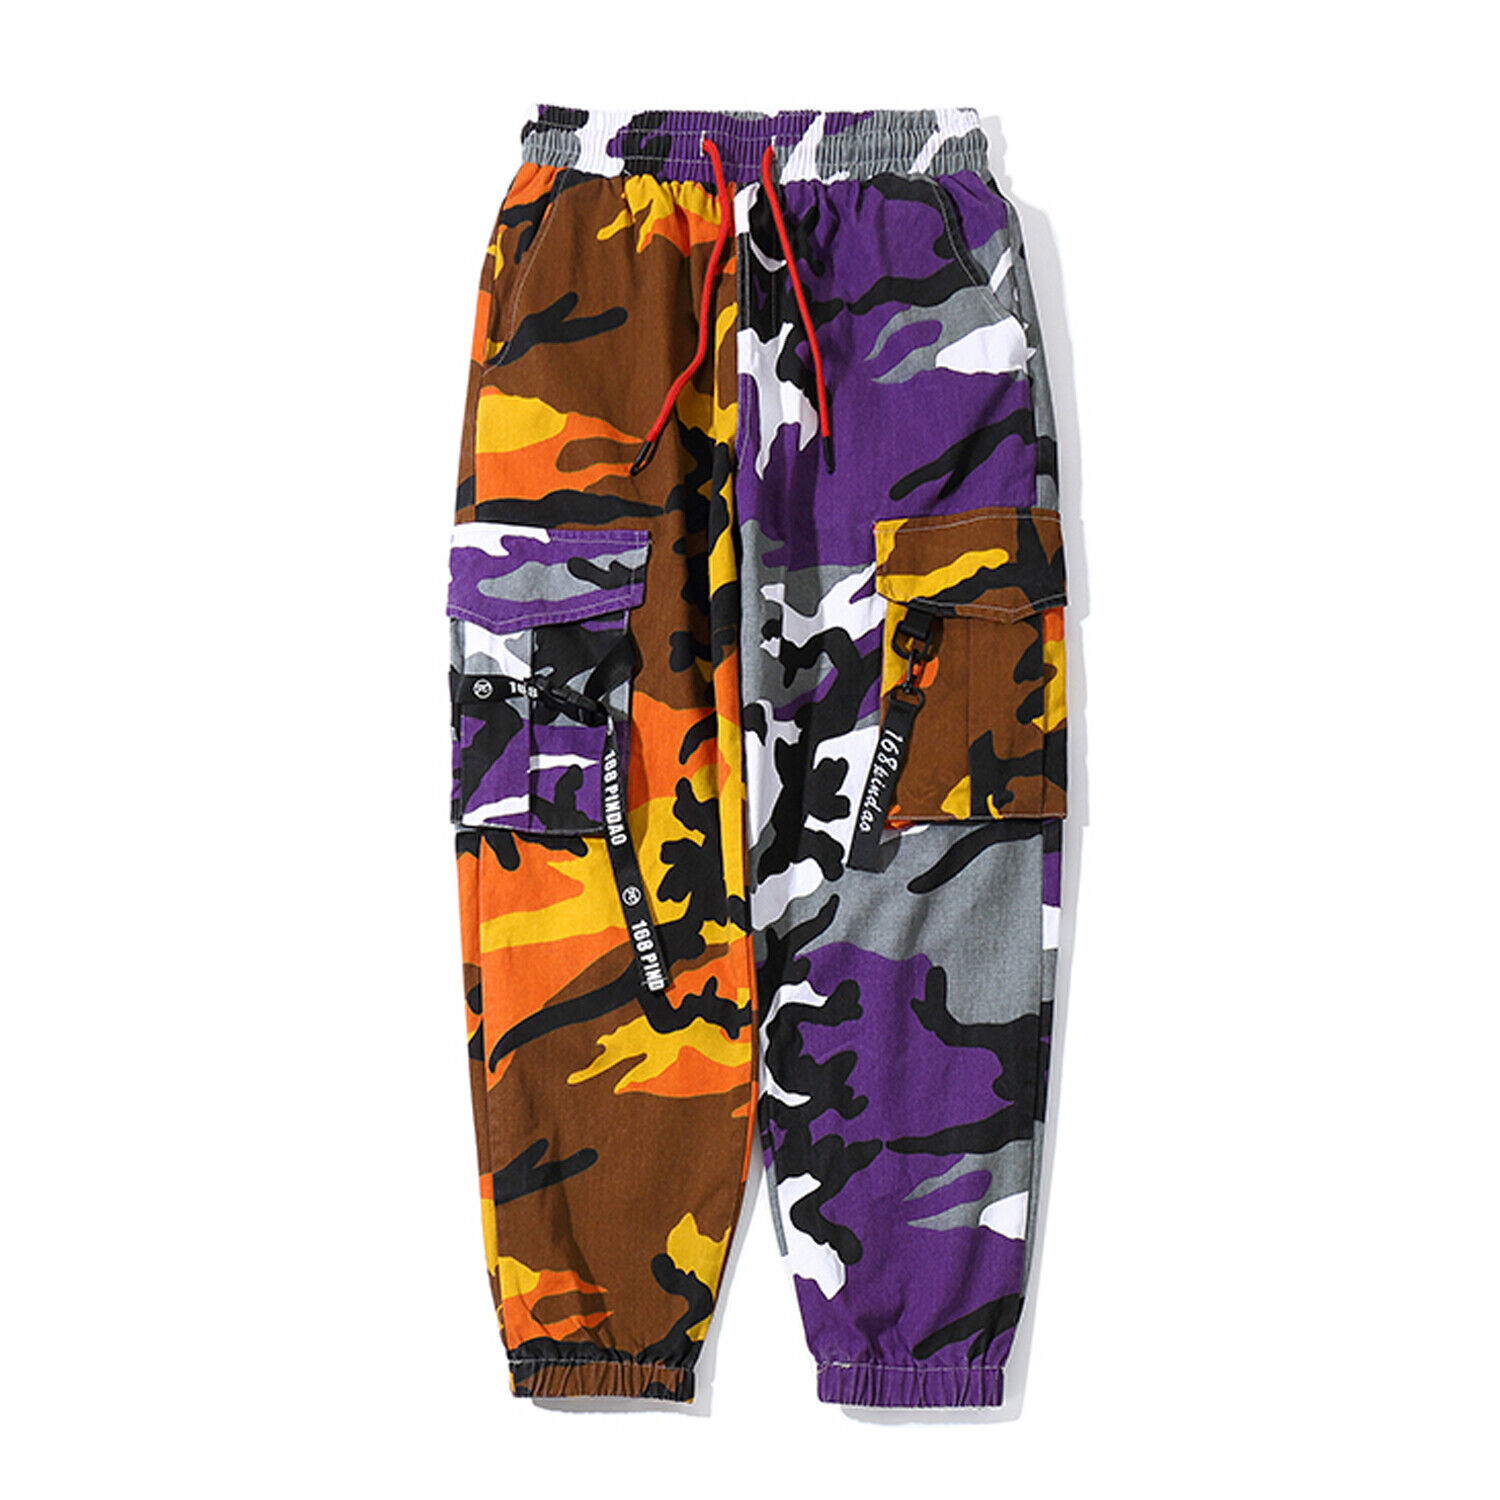 MFCT Camouflage Urban Army Combat Joggers Streetwear Relaxed Fit Cargo Pants